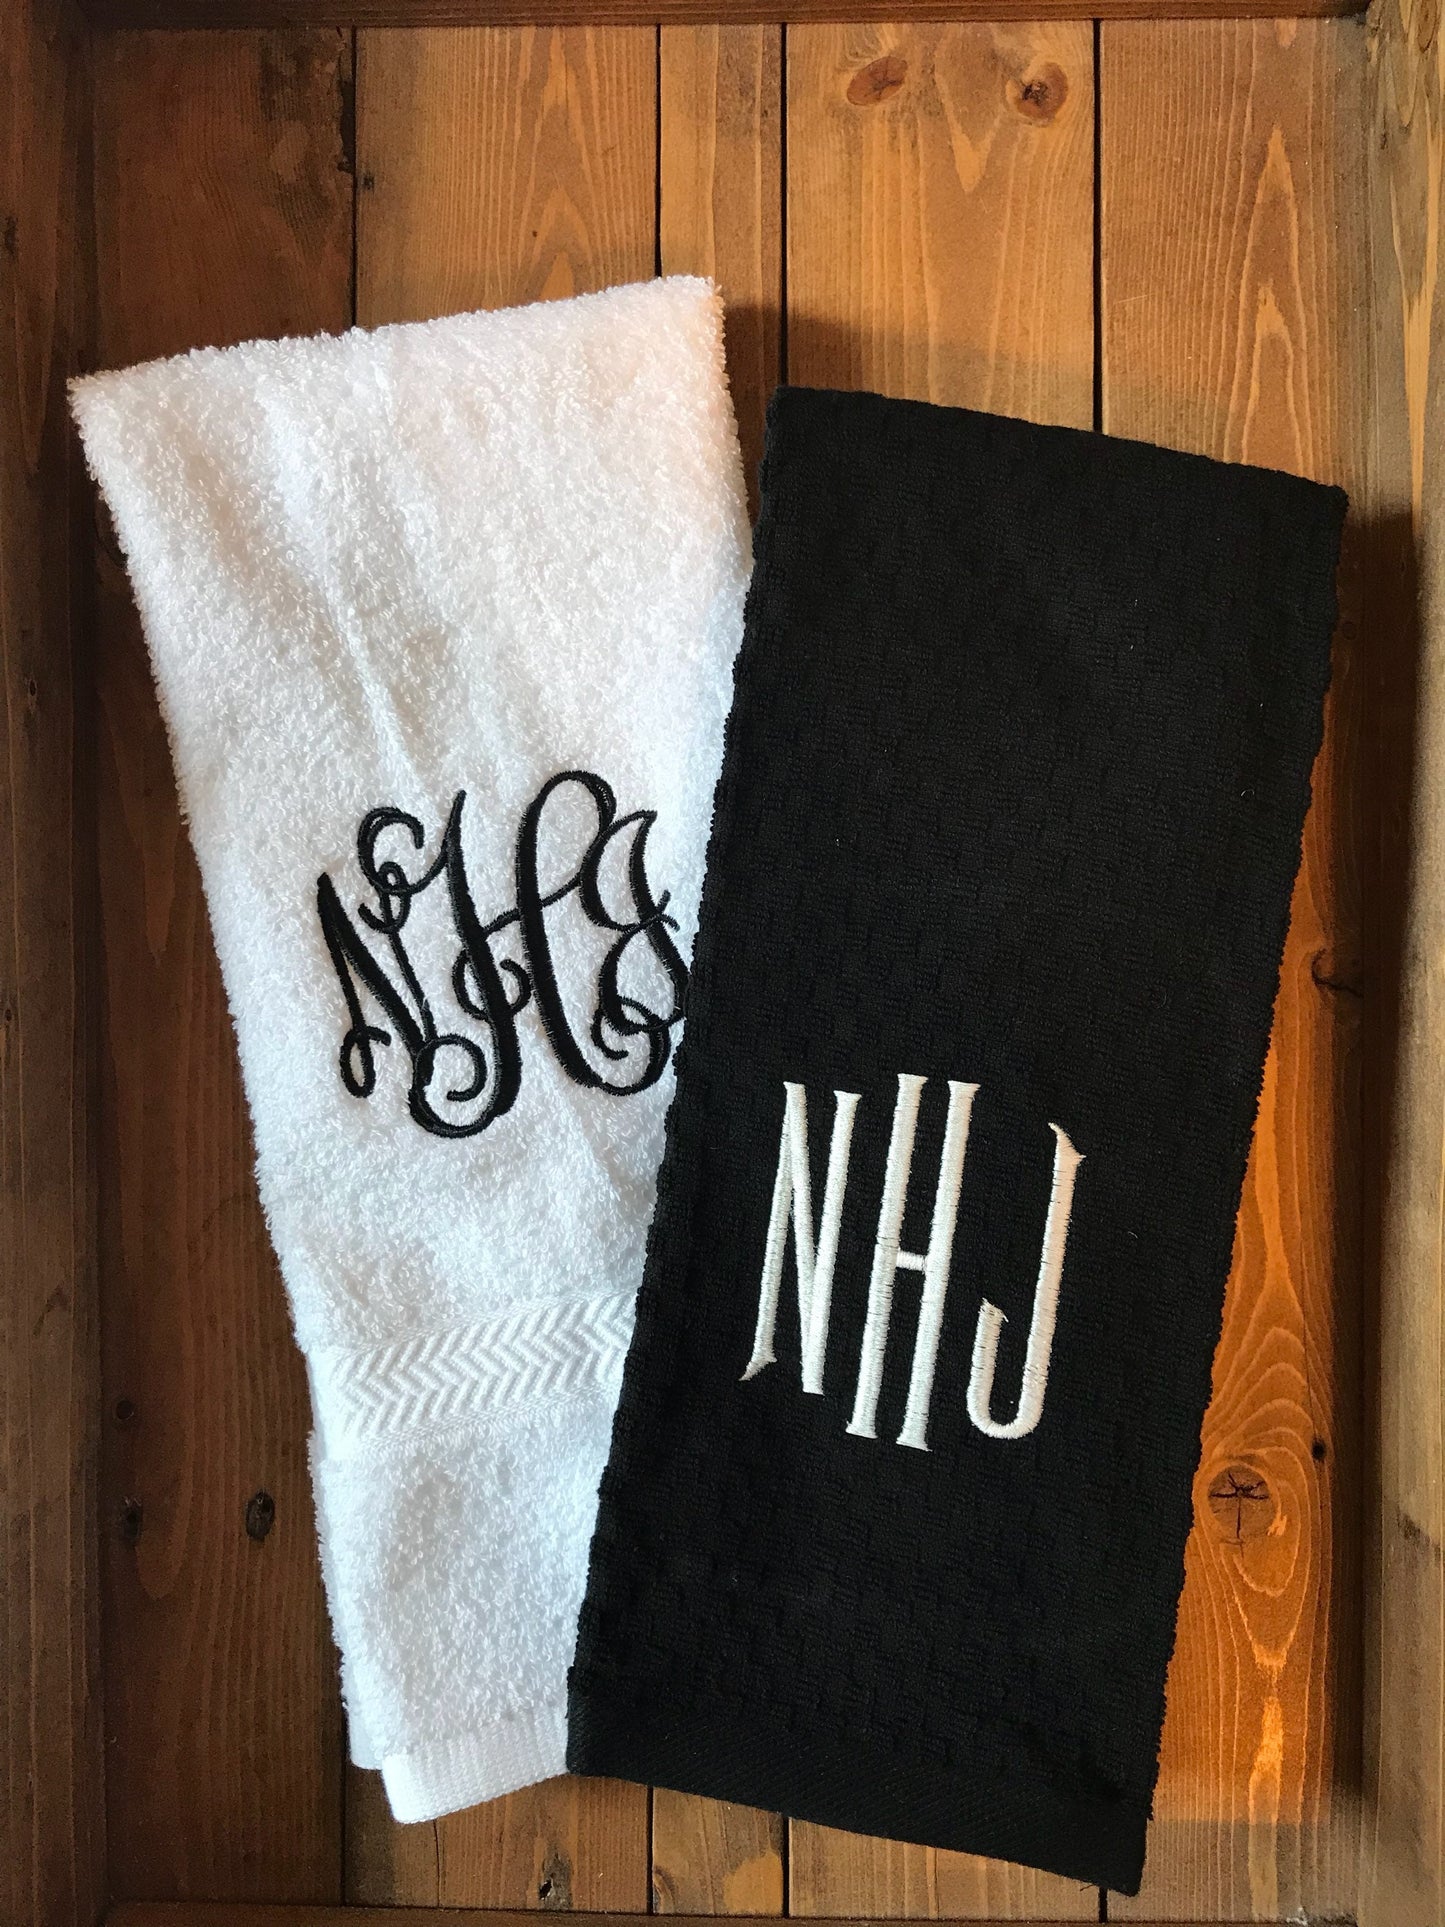 Towel Gift Set - Monogrammed Kitchen and Bath Hand Towel - Personalized Housewarming or Engagement Gift